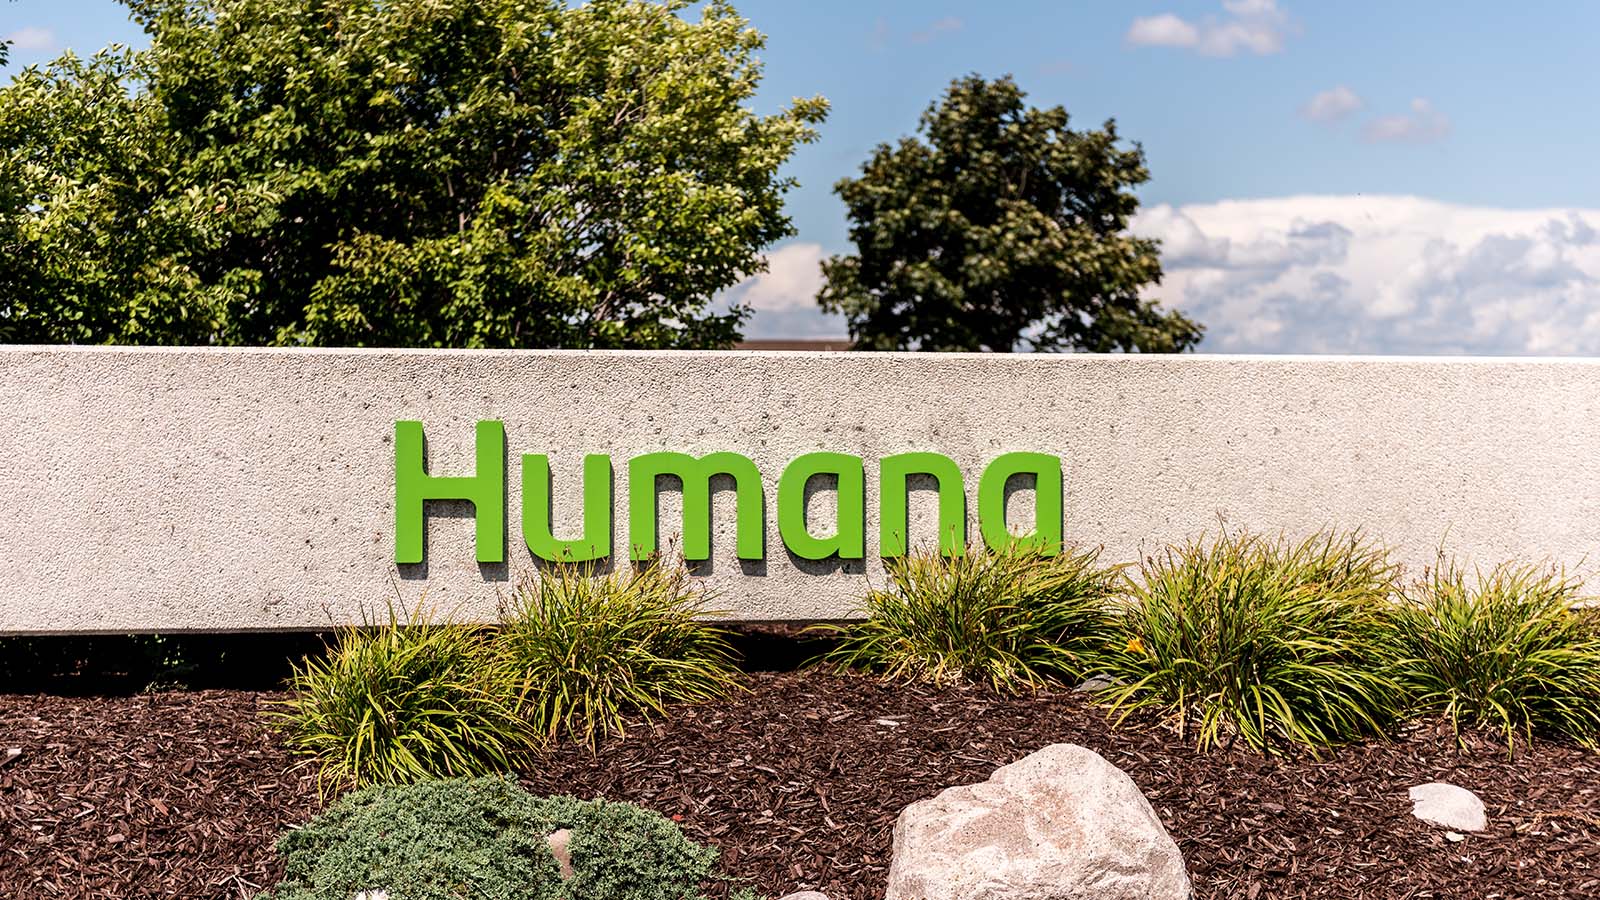 A Humana (HUM stock) sign out front of the company's office in Louisville, Kentucky.